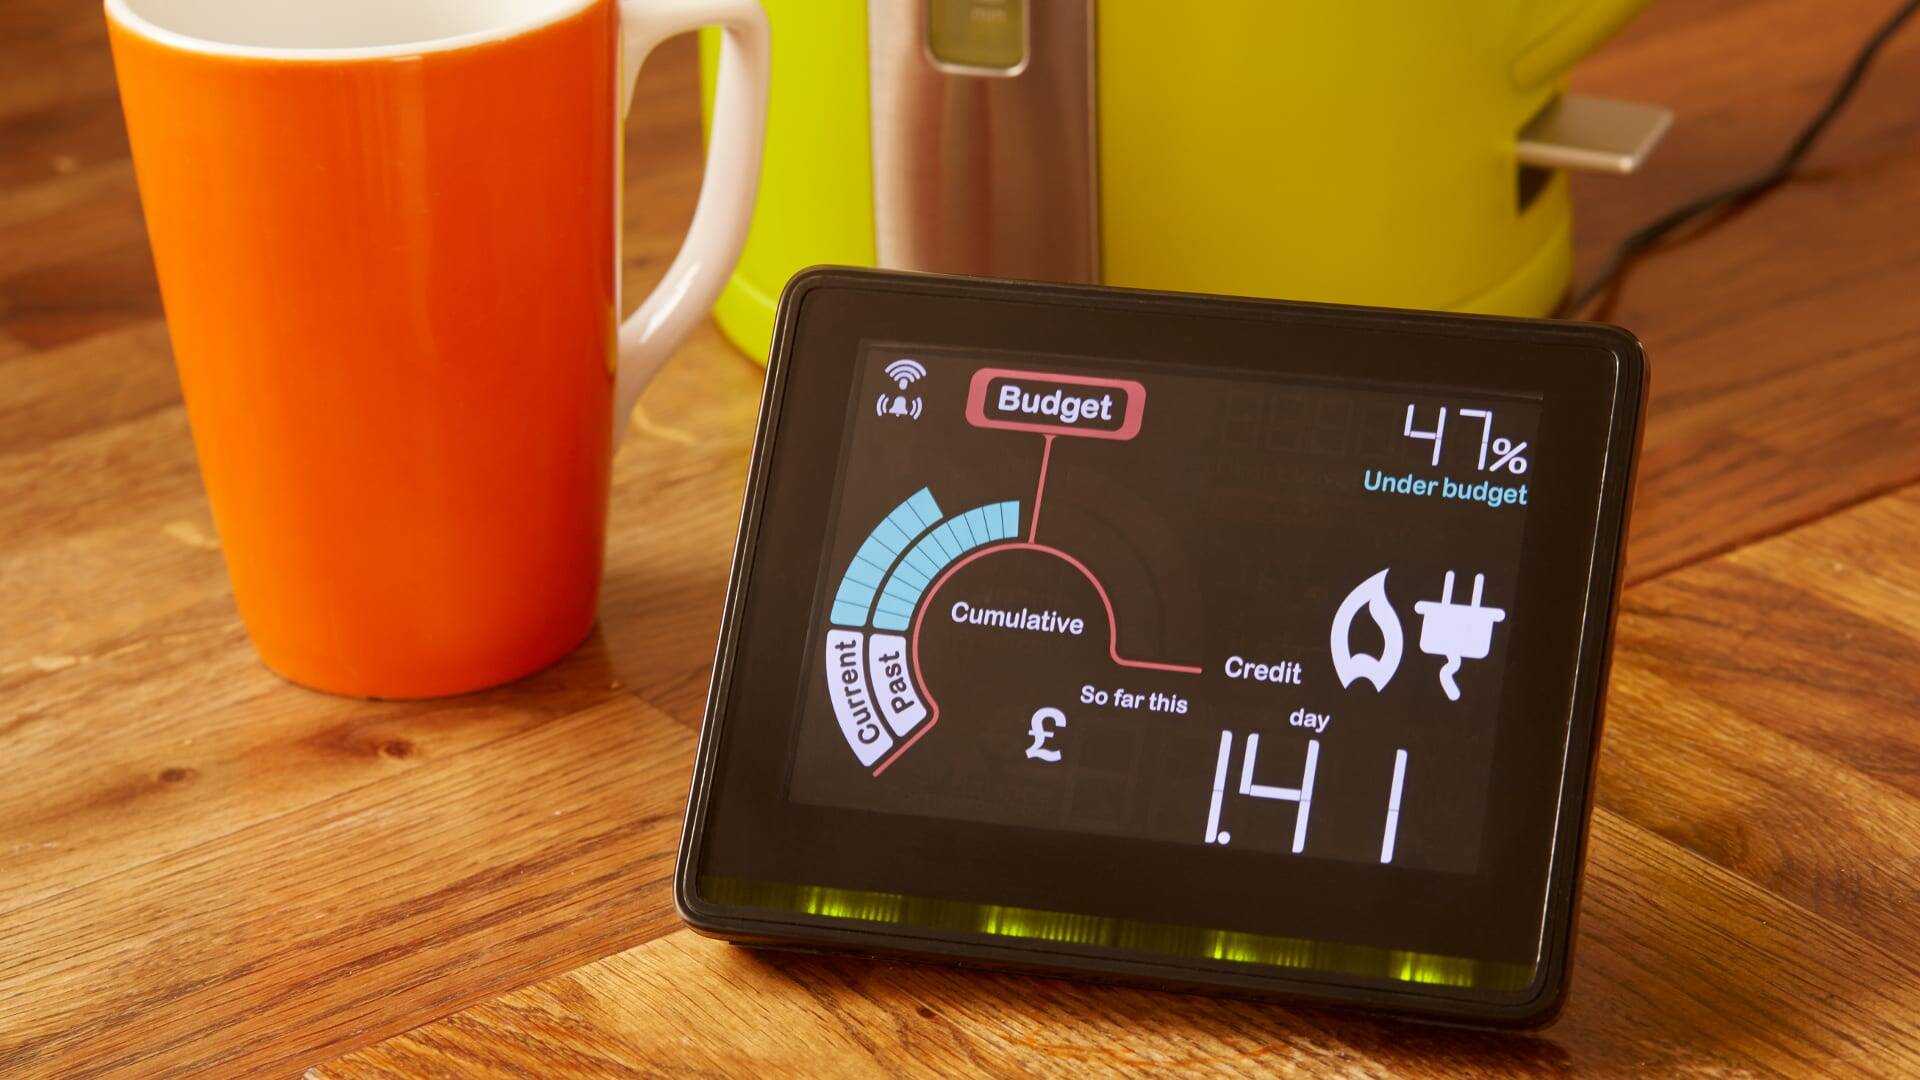 EDF: Industry needs to win back customer confidence in smart meter rollout